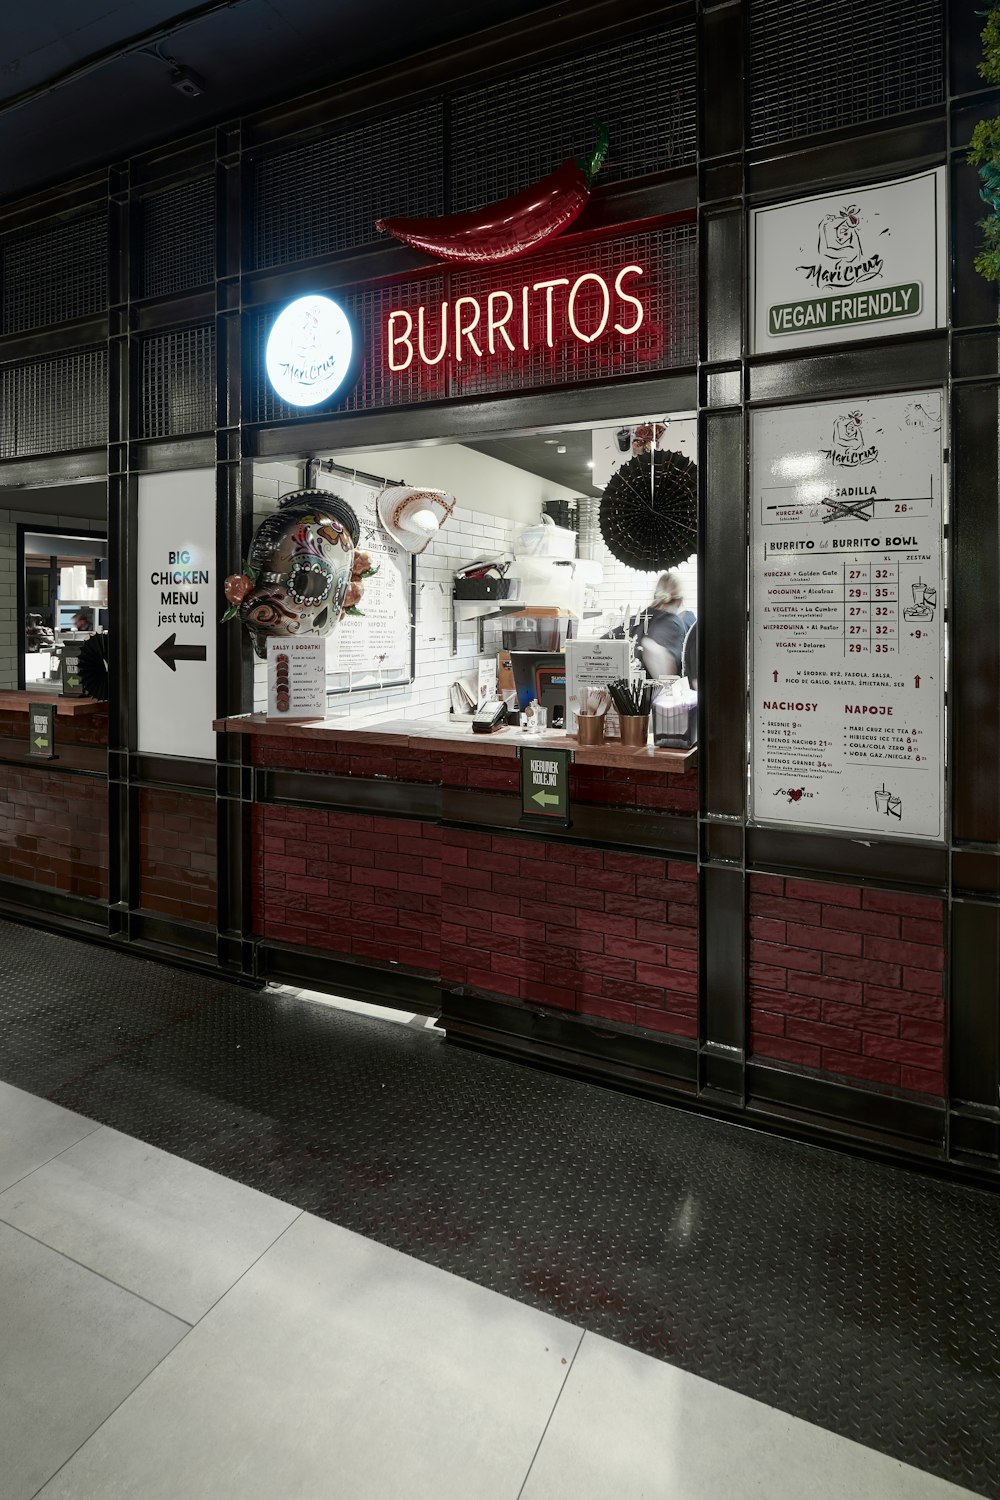 a restaurant called burritos is lit up at night